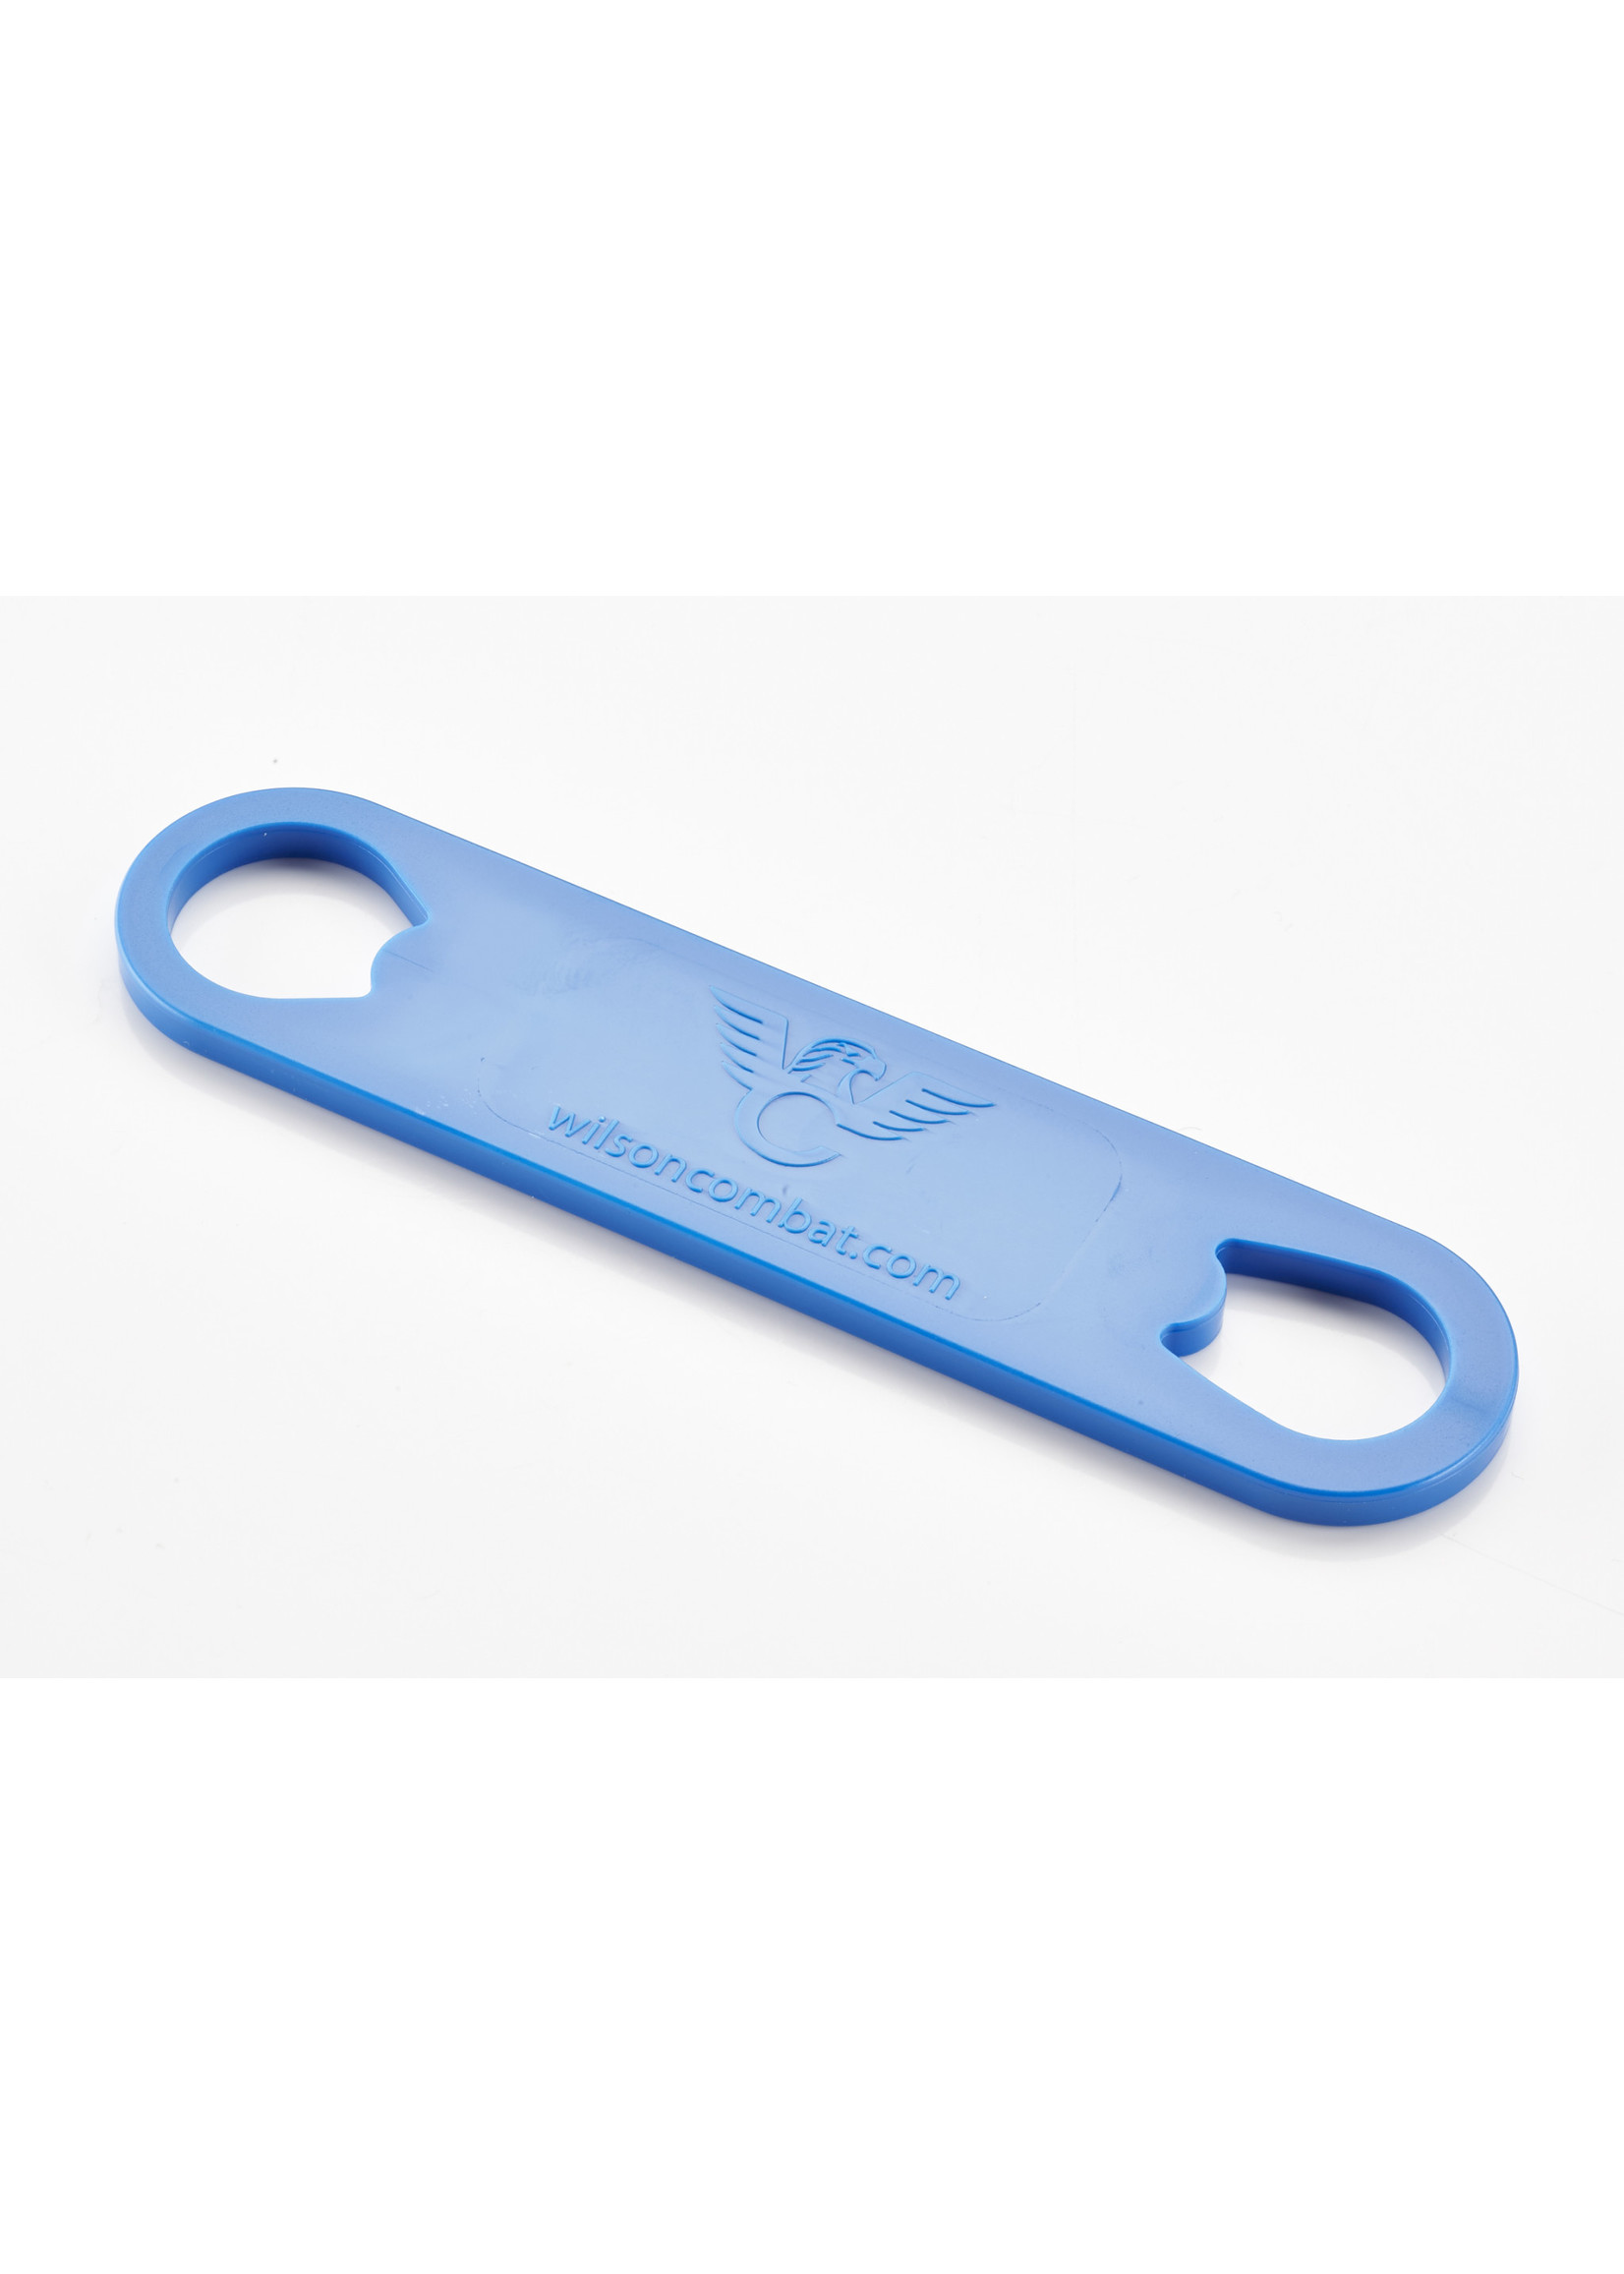 WILSON COMBAT Bushing Wrench, 1911 Full-Size/Compact, Blue Polymer